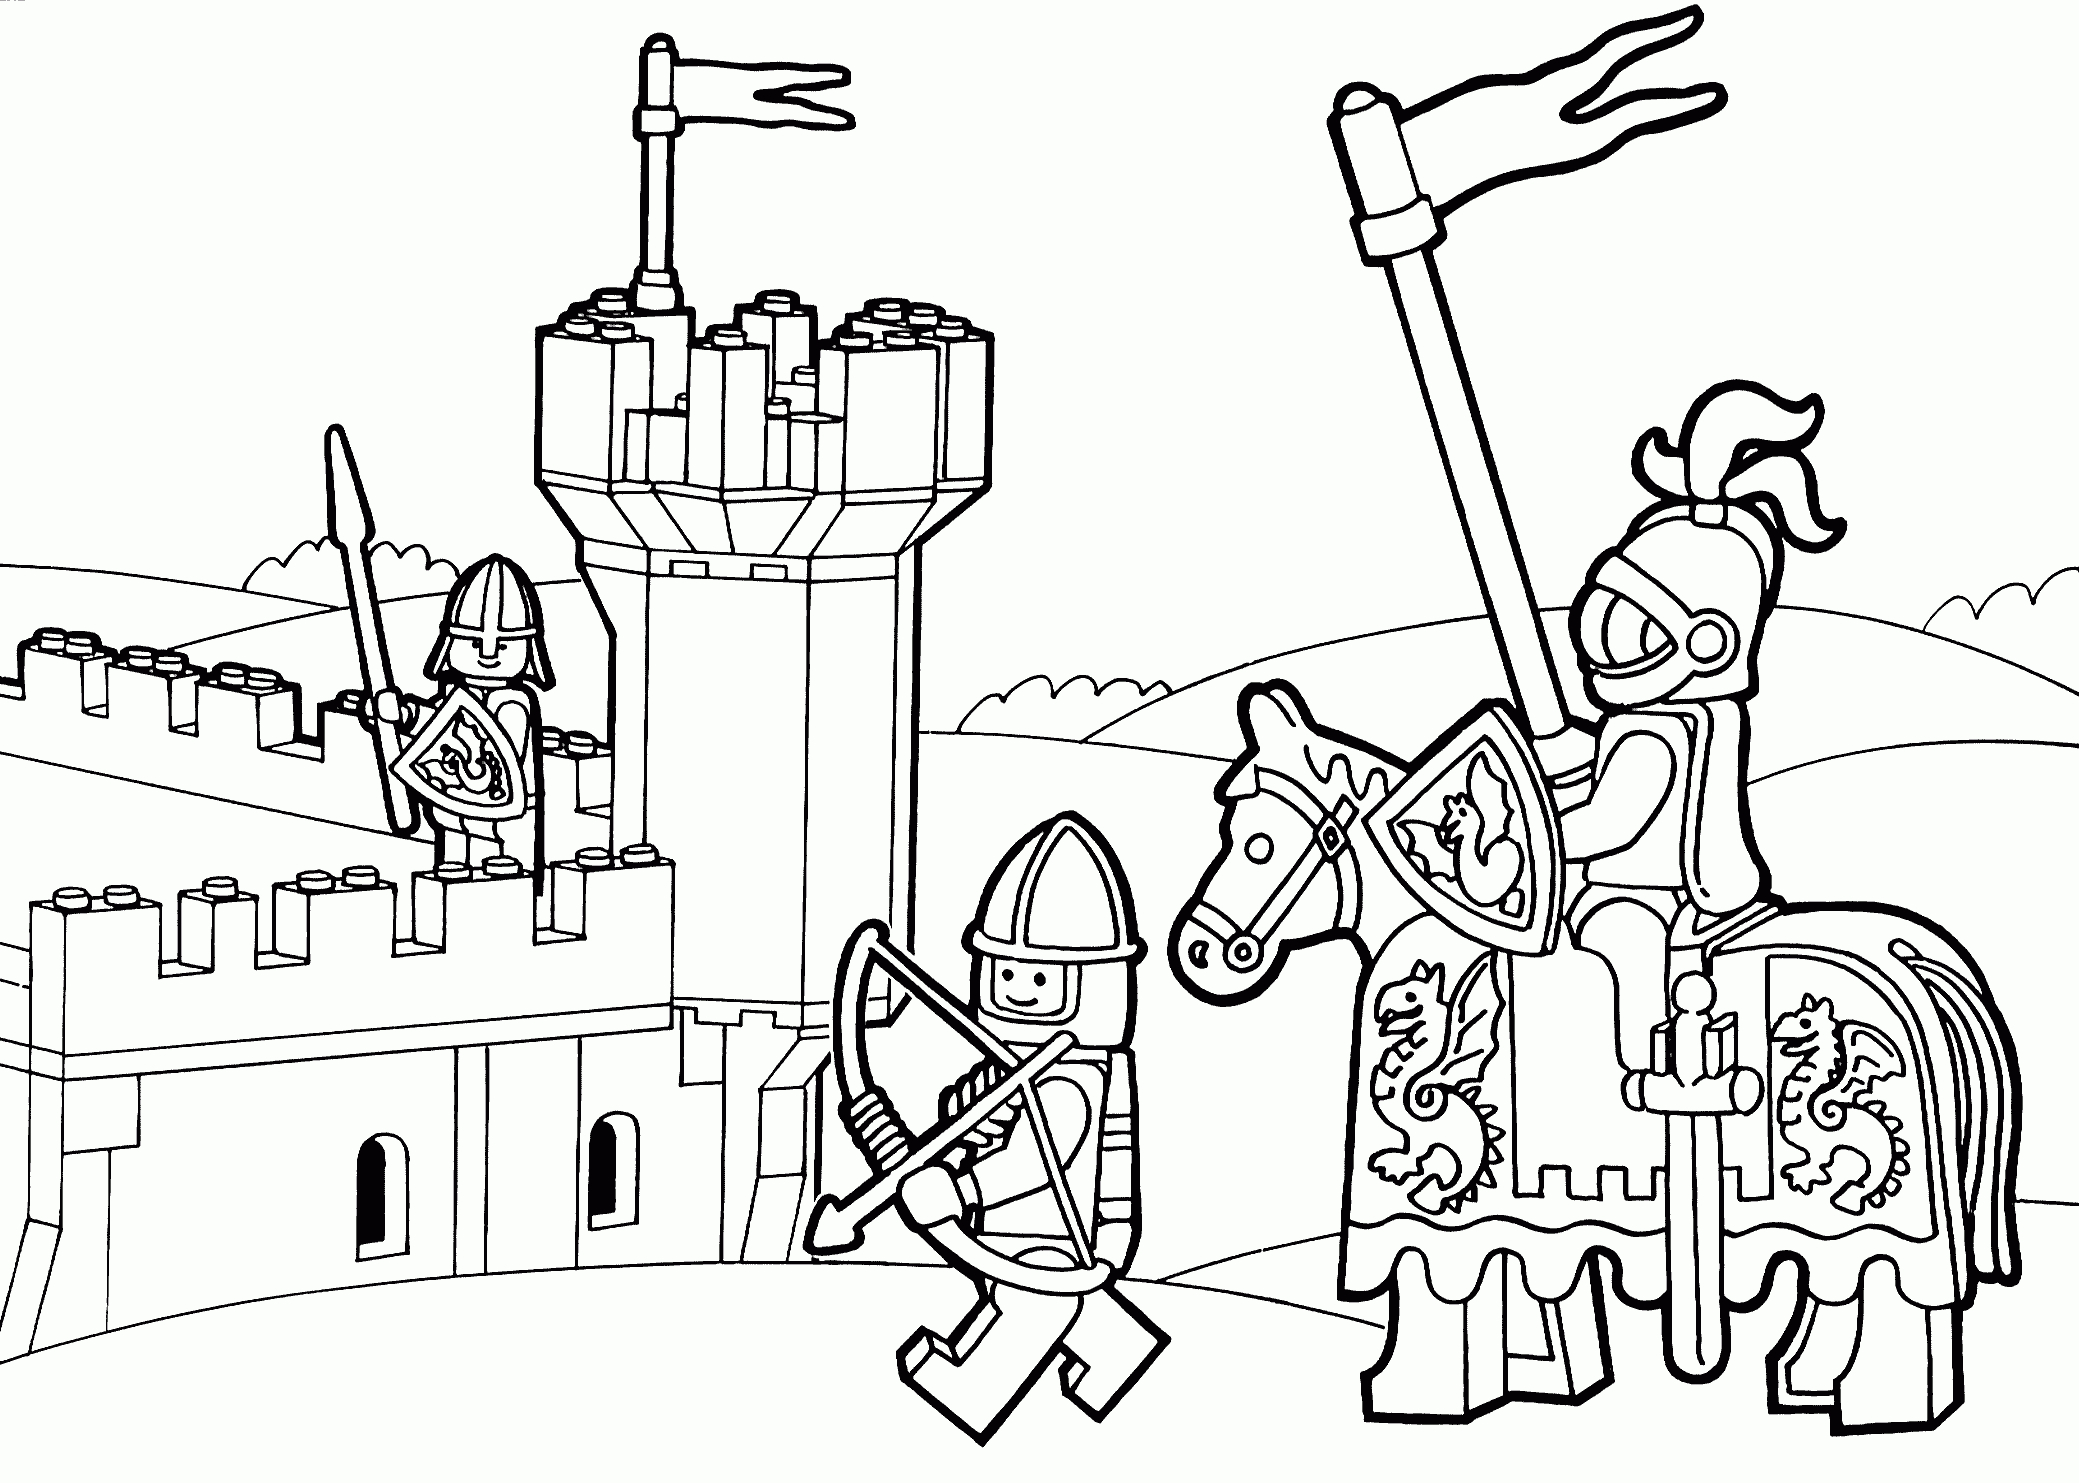 Lego Duplo Knights Coloring Page For Kids, Printable Free. Lego - Free Printable Pictures Of Knights